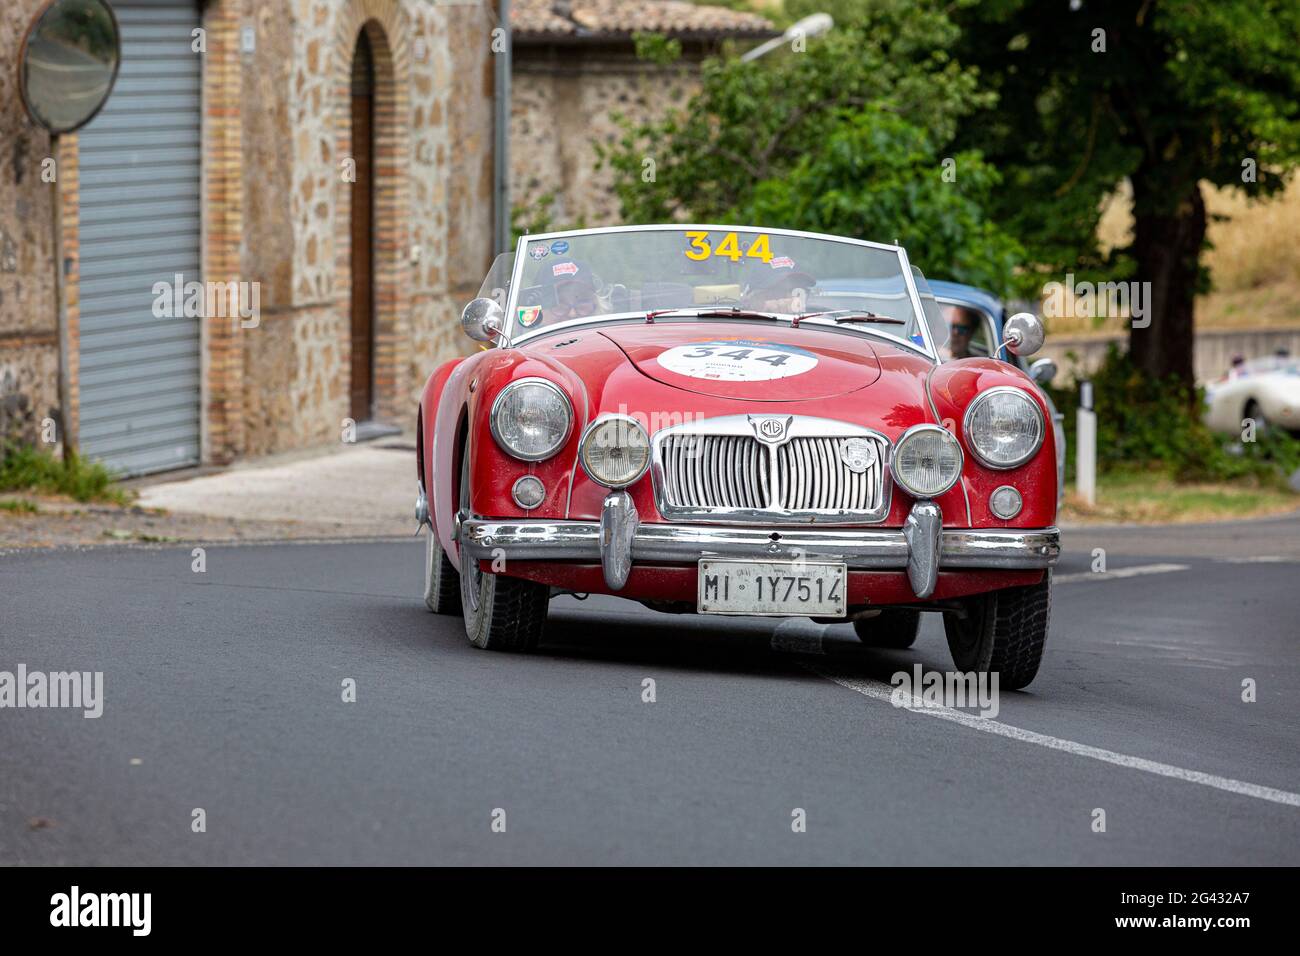 Orvieto, Italy. 18th June, 2021. Cars competing in the Mille Miglia classic car rally pass through Orvieto in Umbria on the third stage from Rome to Bologna. The thousand mile rally recreates the original which ran from 1926 to 1957. Credit: Stephen Bisgrove/Alamy Live News Stock Photo